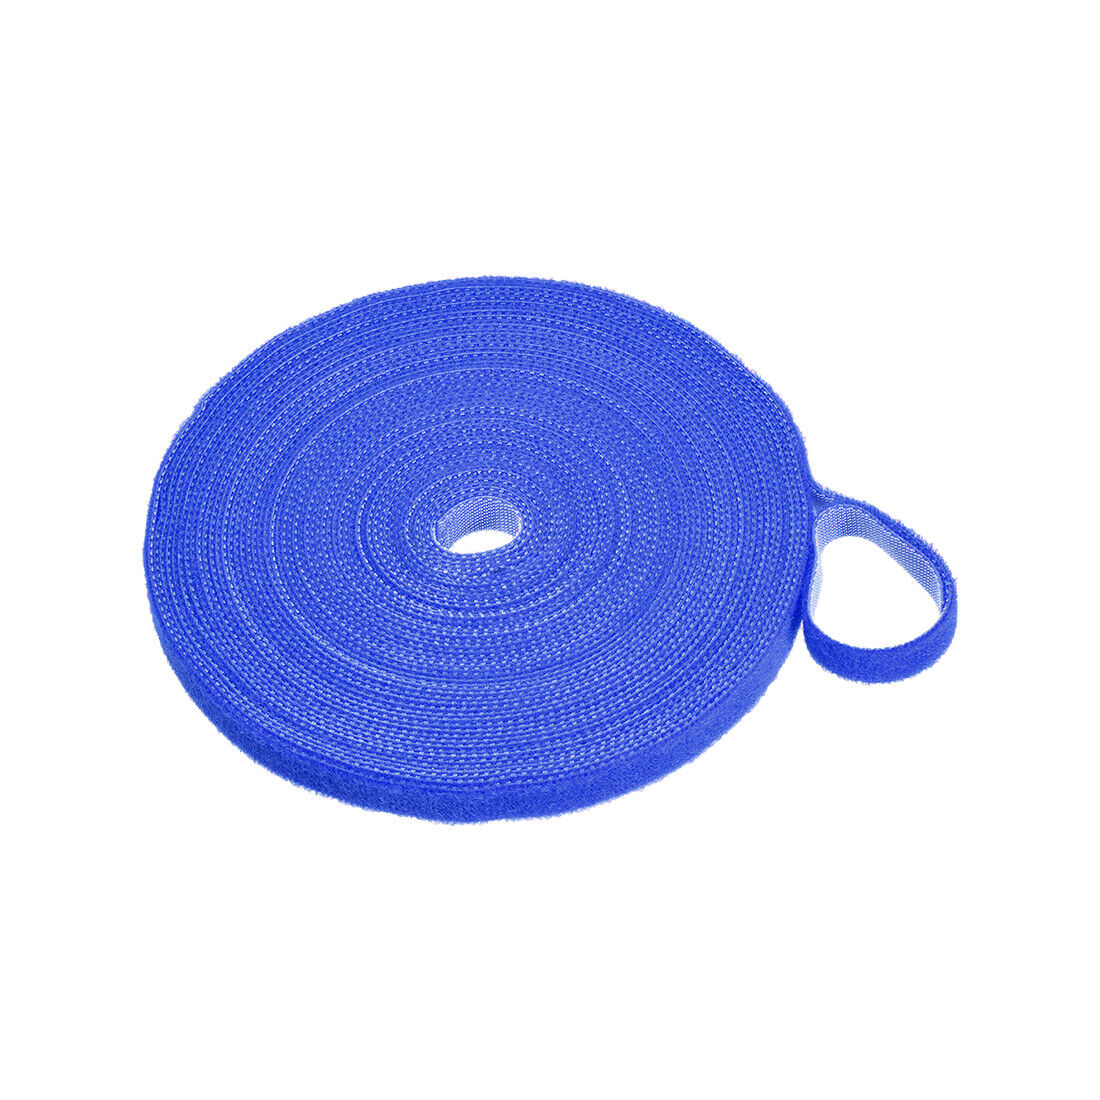 Reusable Cable Ties, Hook And Loop Cord Strap, 11 Yard X 0.4 Inch Blue 1 Roll